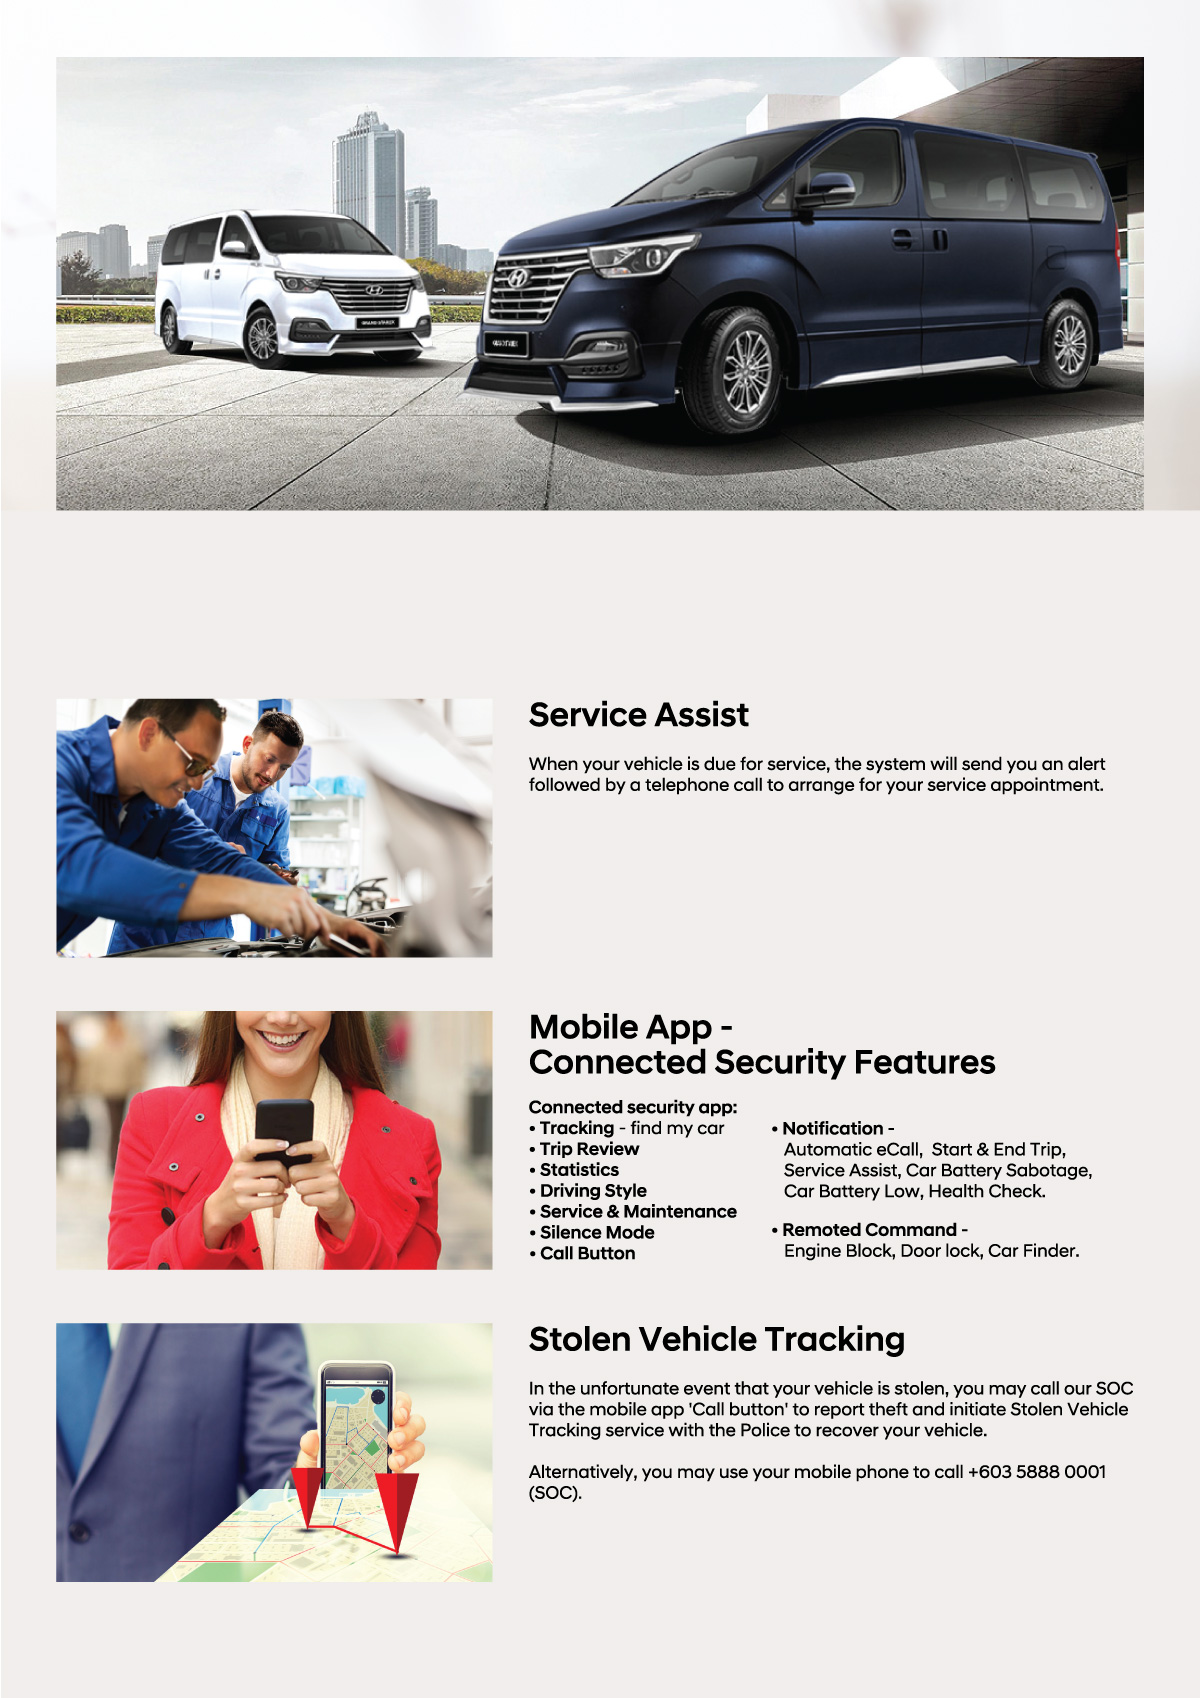 03 - Hyundai Telematics - 24/7 protection and assistance. eCall - automatic Accident Detection | Manual eCall : Emergency Assistance | bCall : Breakdown Assistance. | Service Assist | Mobile App - Connected Security Features | Stolen Vehicle Tracking 